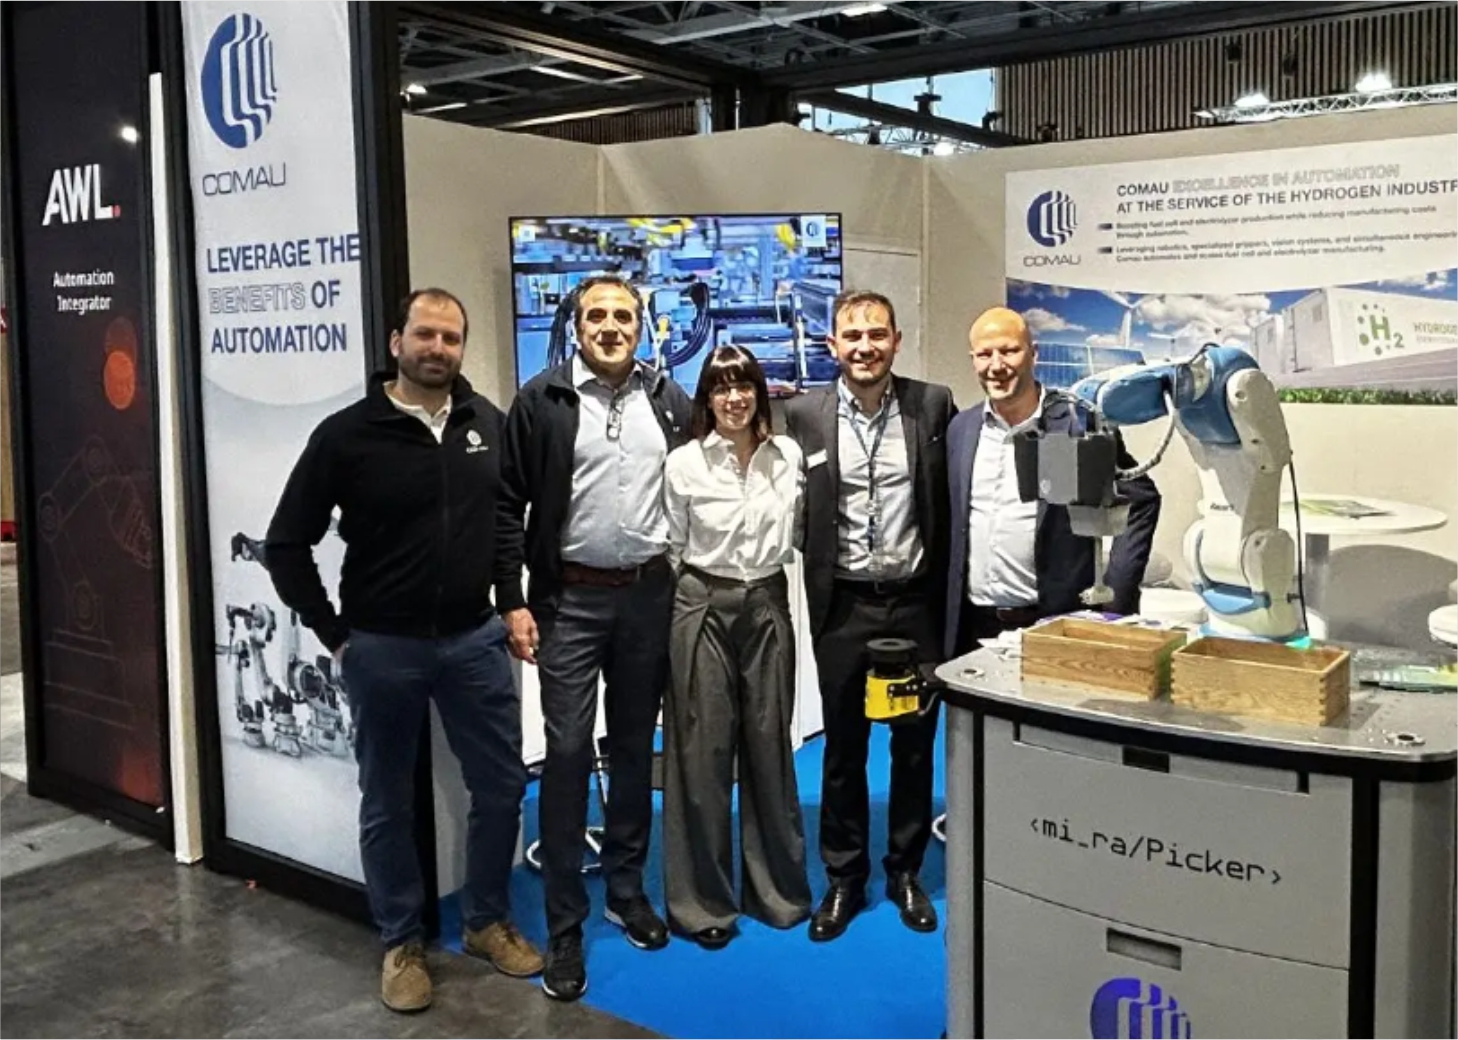 Comau showcase its Hydrogen solutions at the Hyvolution fair in Paris